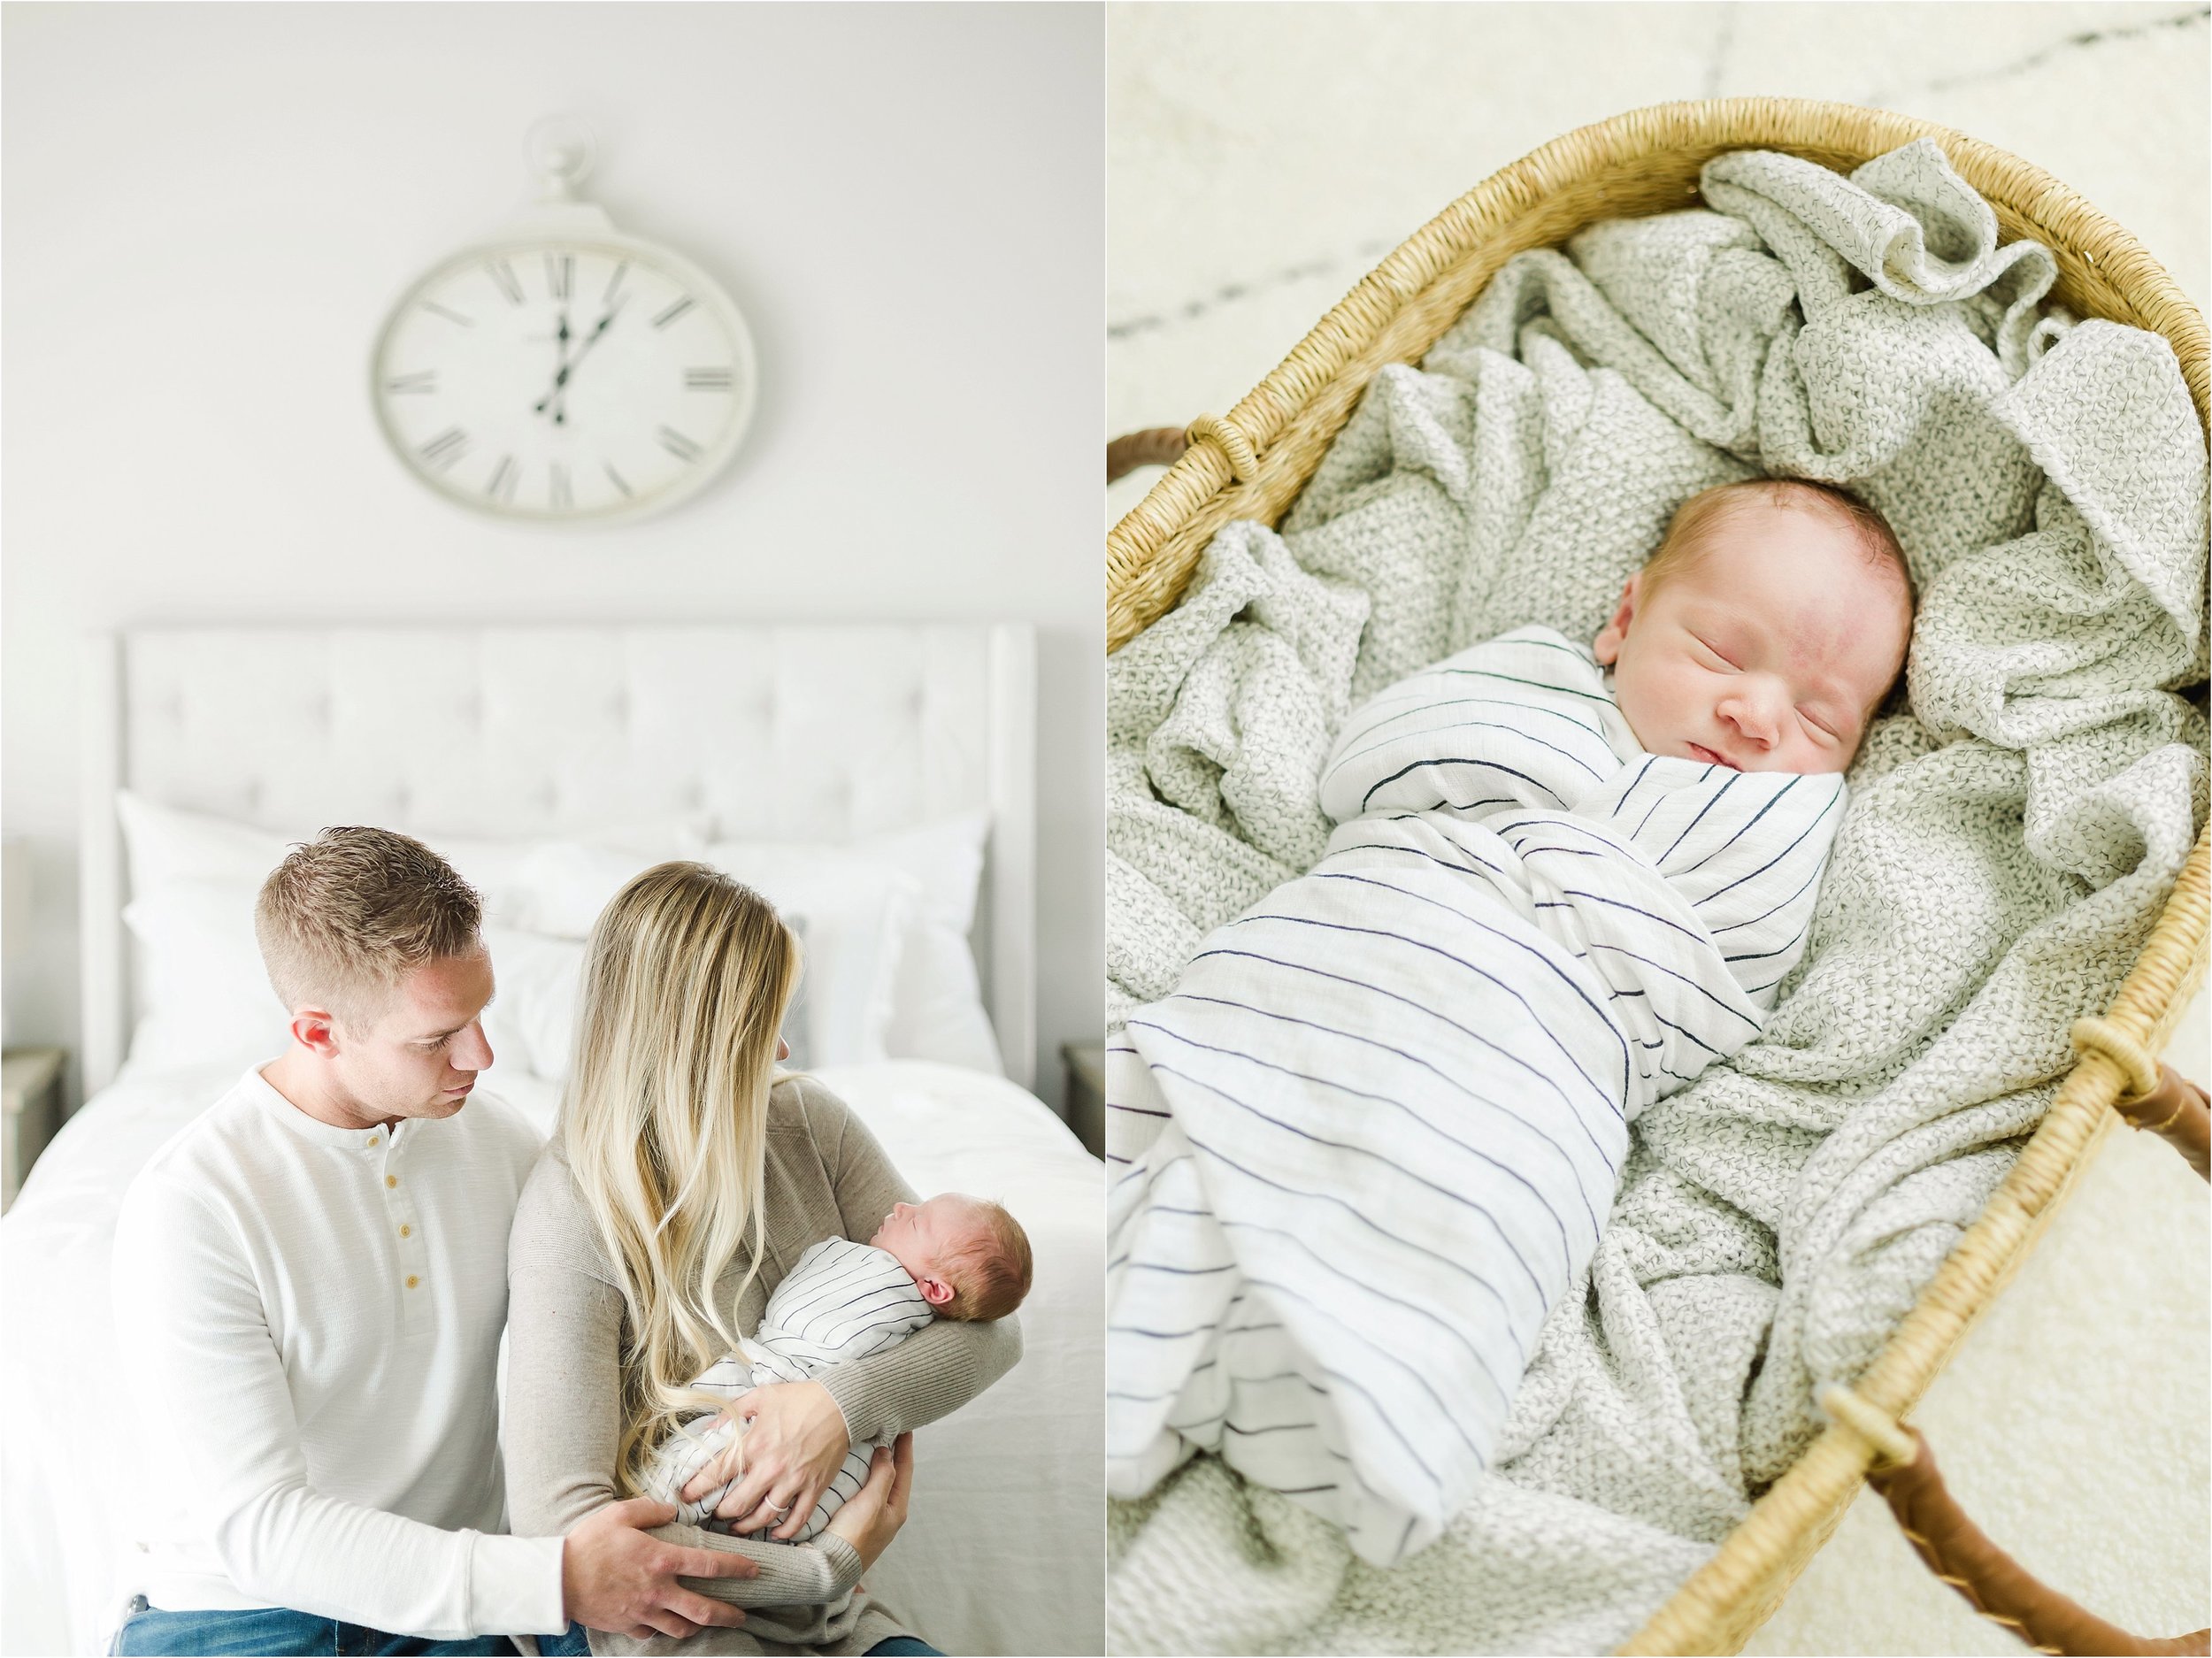 Image on the left shows Mother and Father sitting on the edge of the bed while holding their newborn son.  Image on the right shows baby boy asleep in a basket while swaddled.